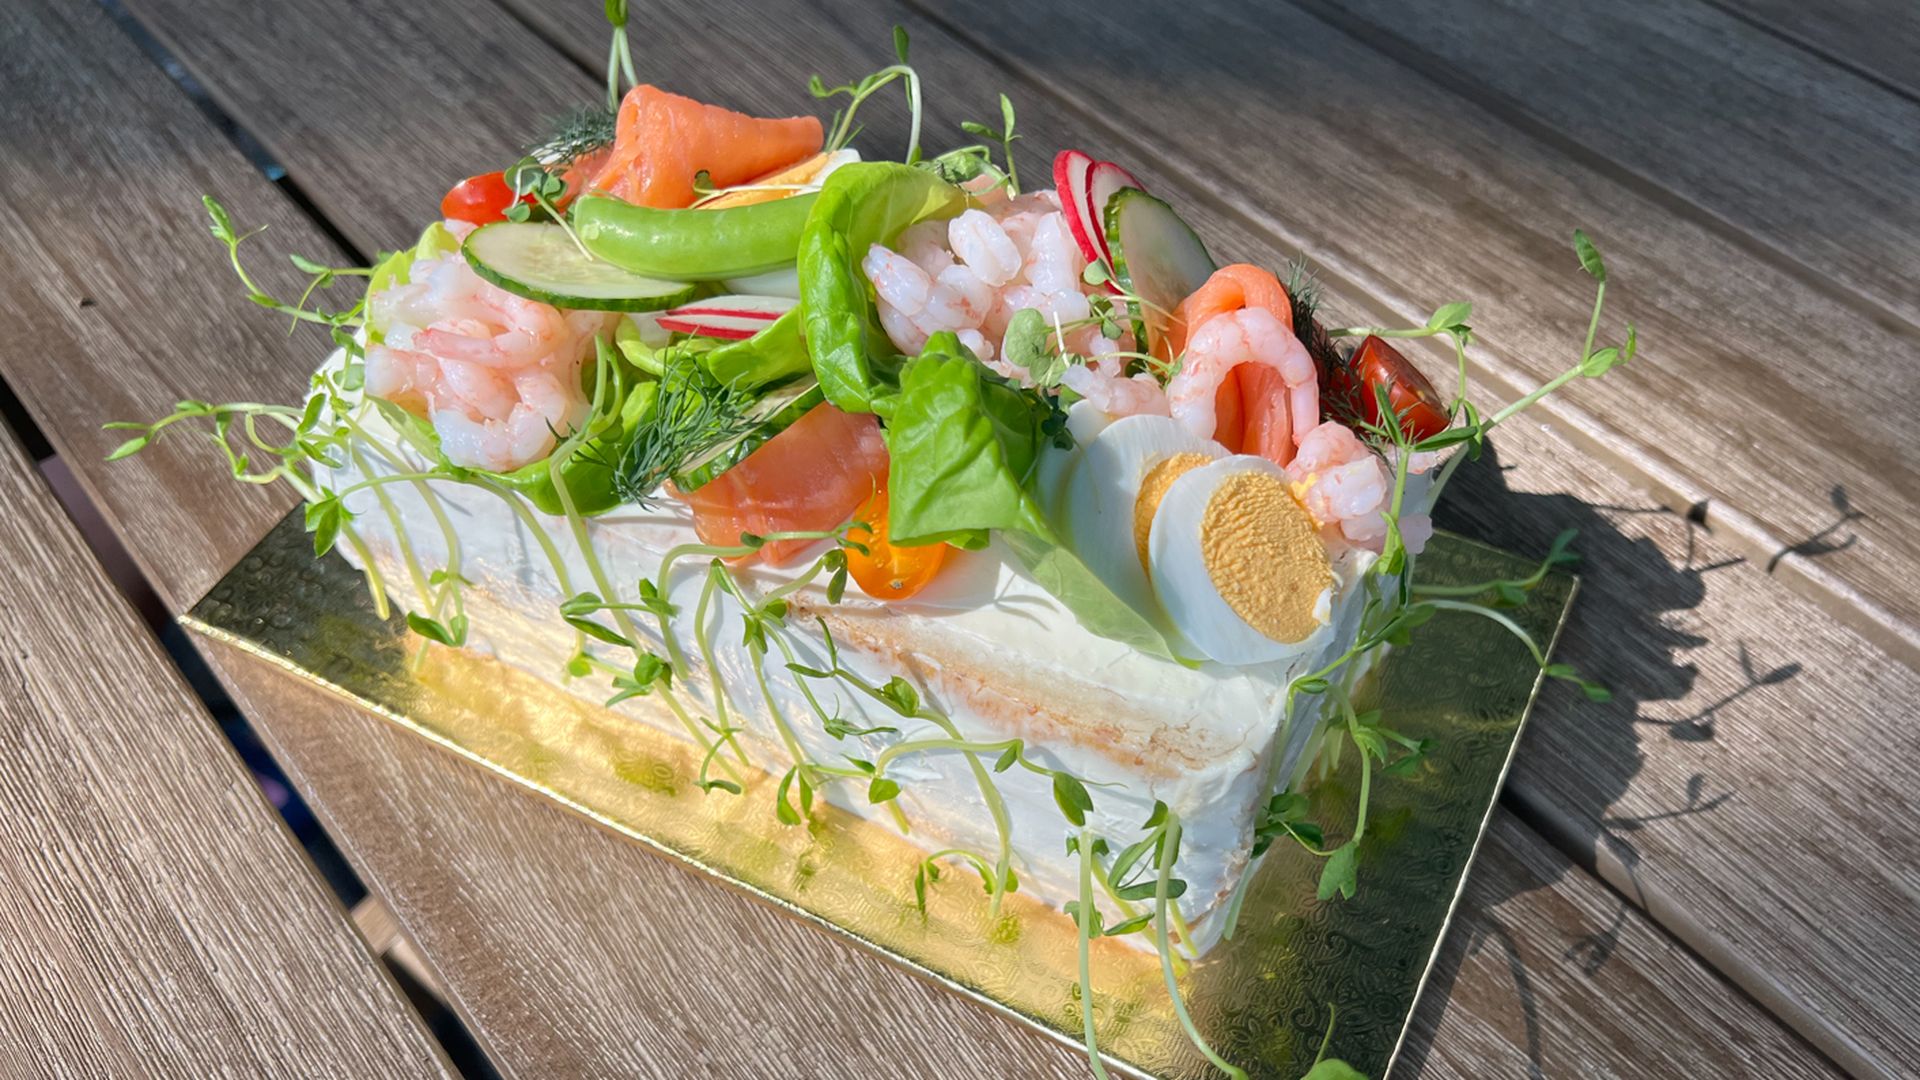 An elaborate cake topped with eggs, shrimp, salmon and greens.